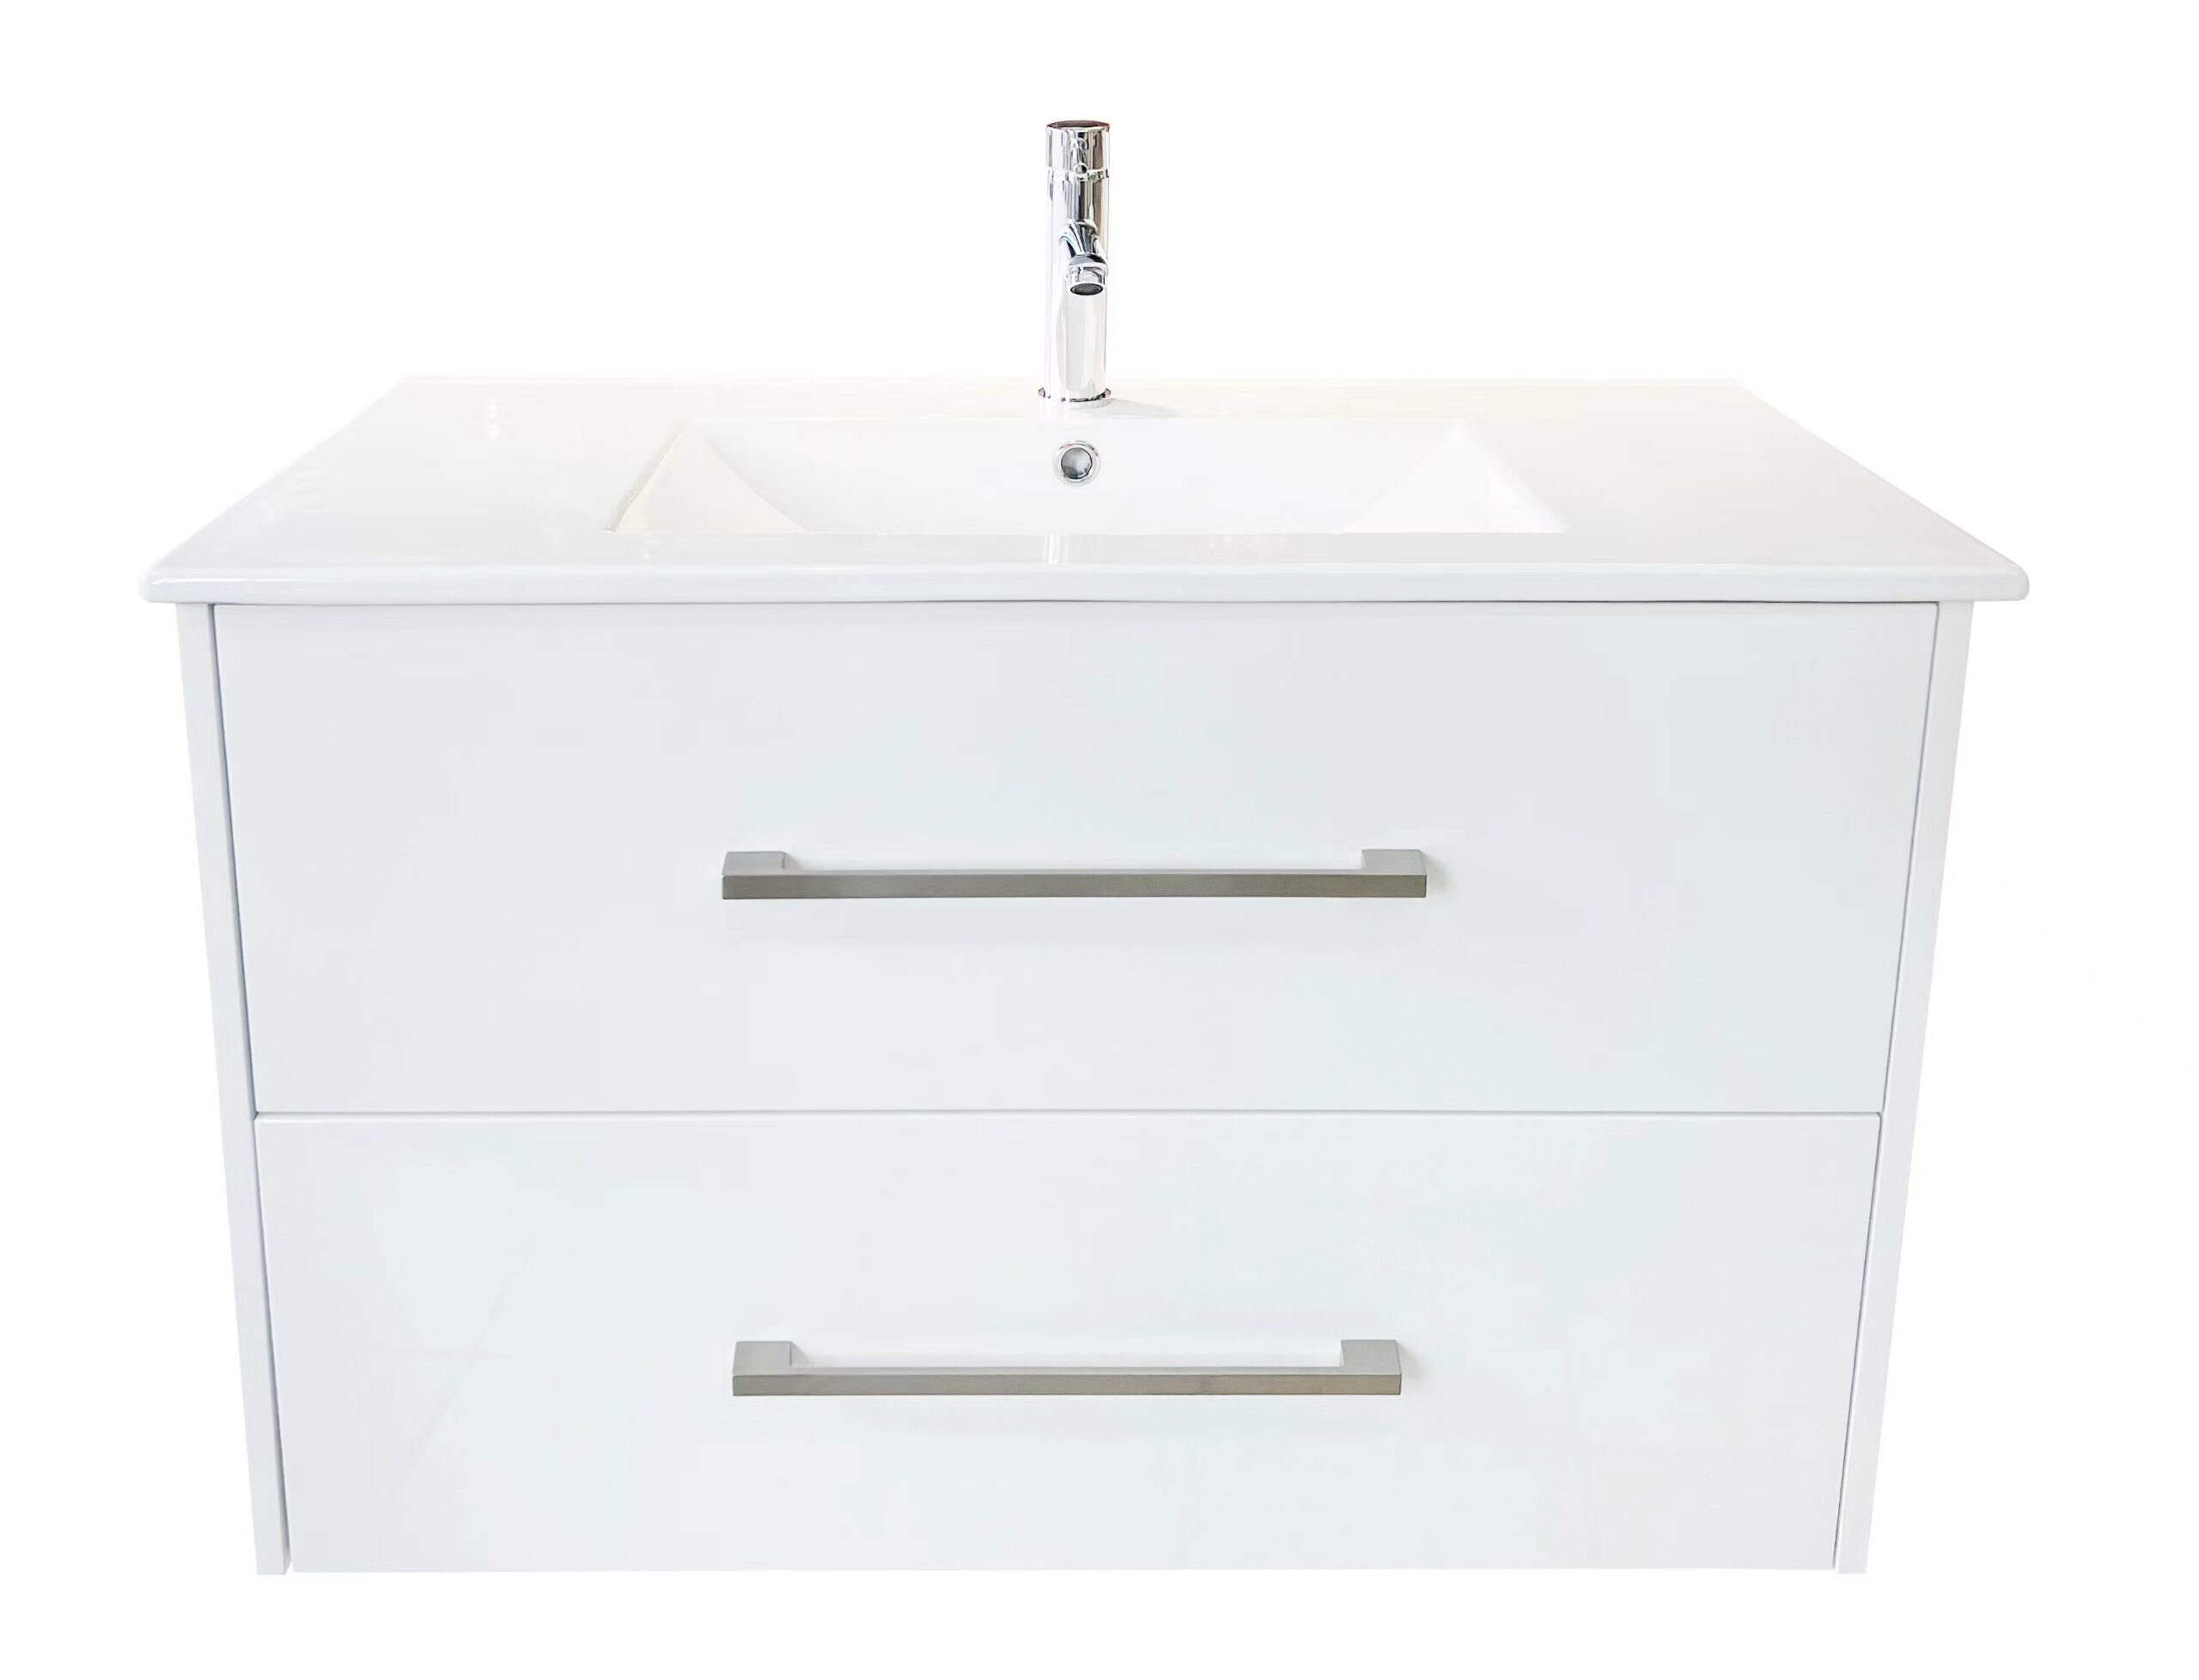 900E-HW 900mm WHITE WALL HUNG VANITY CABINET FRONT VIEW